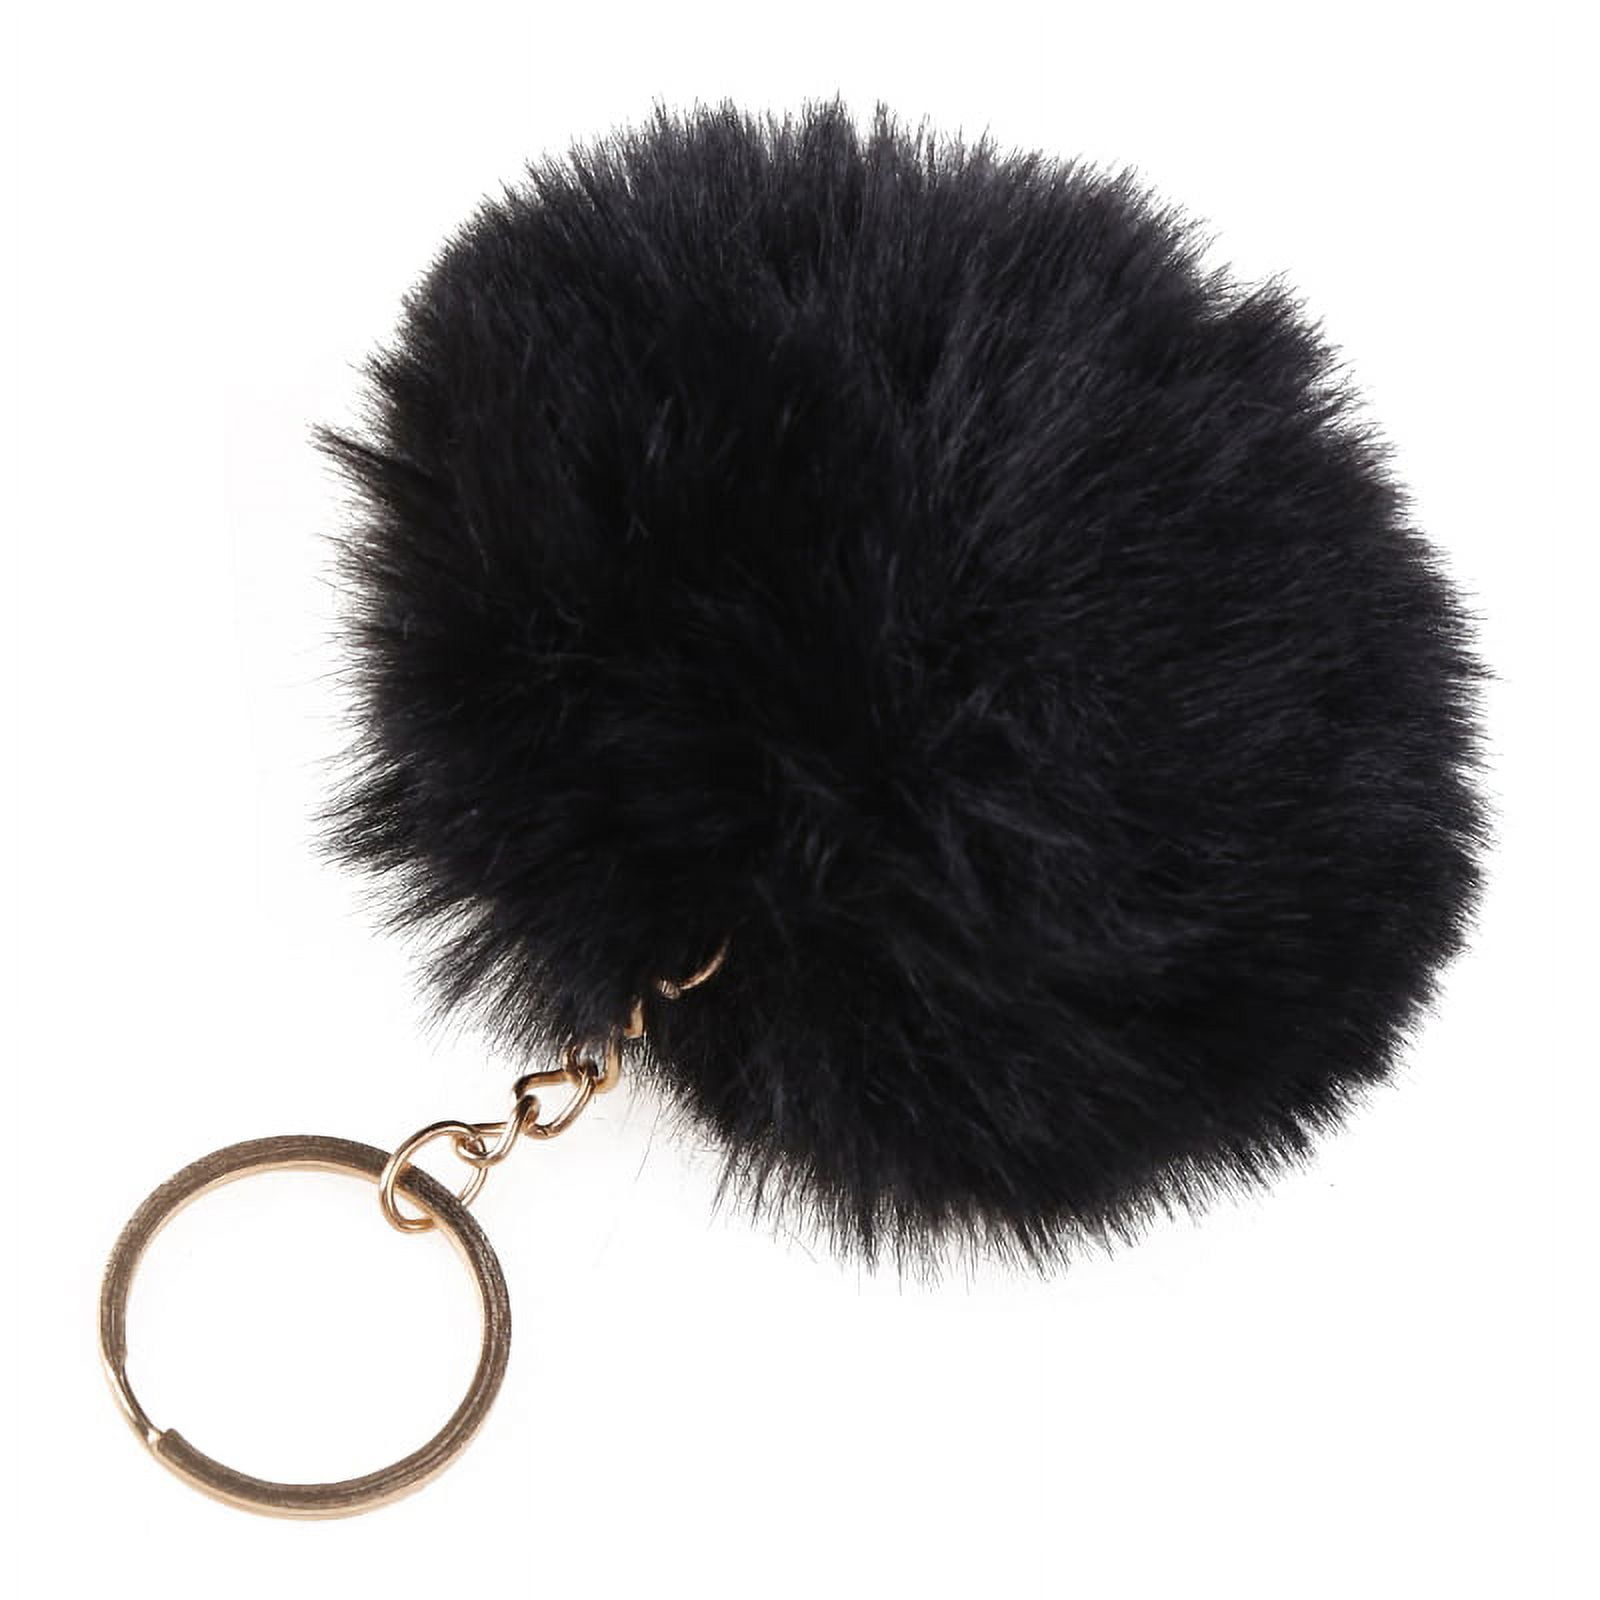 100% Real Raccoon fur Pompoms For Knitted Hats Beanies Rainbow Fluffy Hairy  Ball Poms For Bags Keychain Clothes Accessories